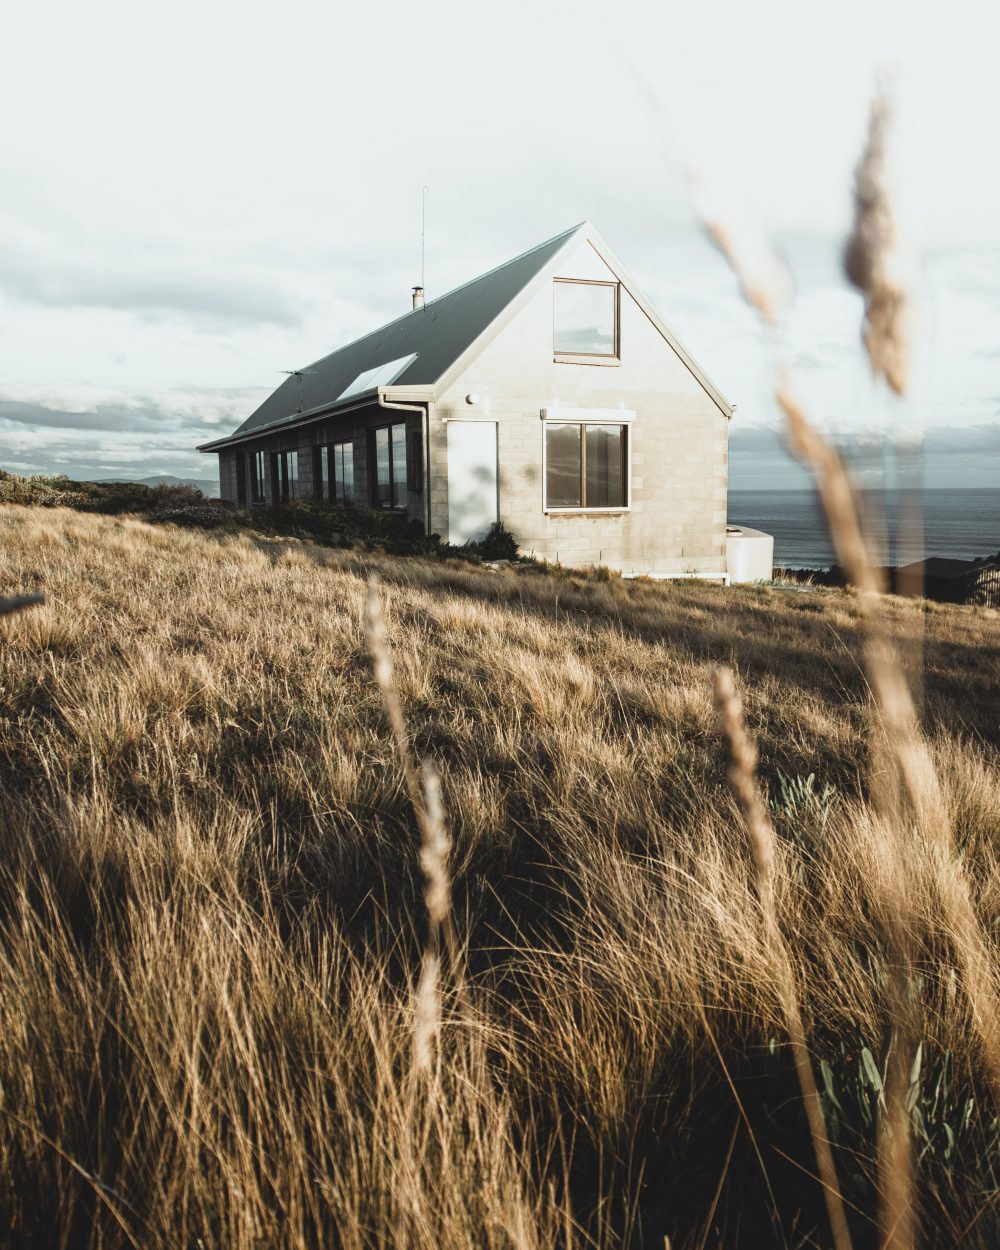 Tasmania Hilltop view of building in countryside and beach / Elopement photography